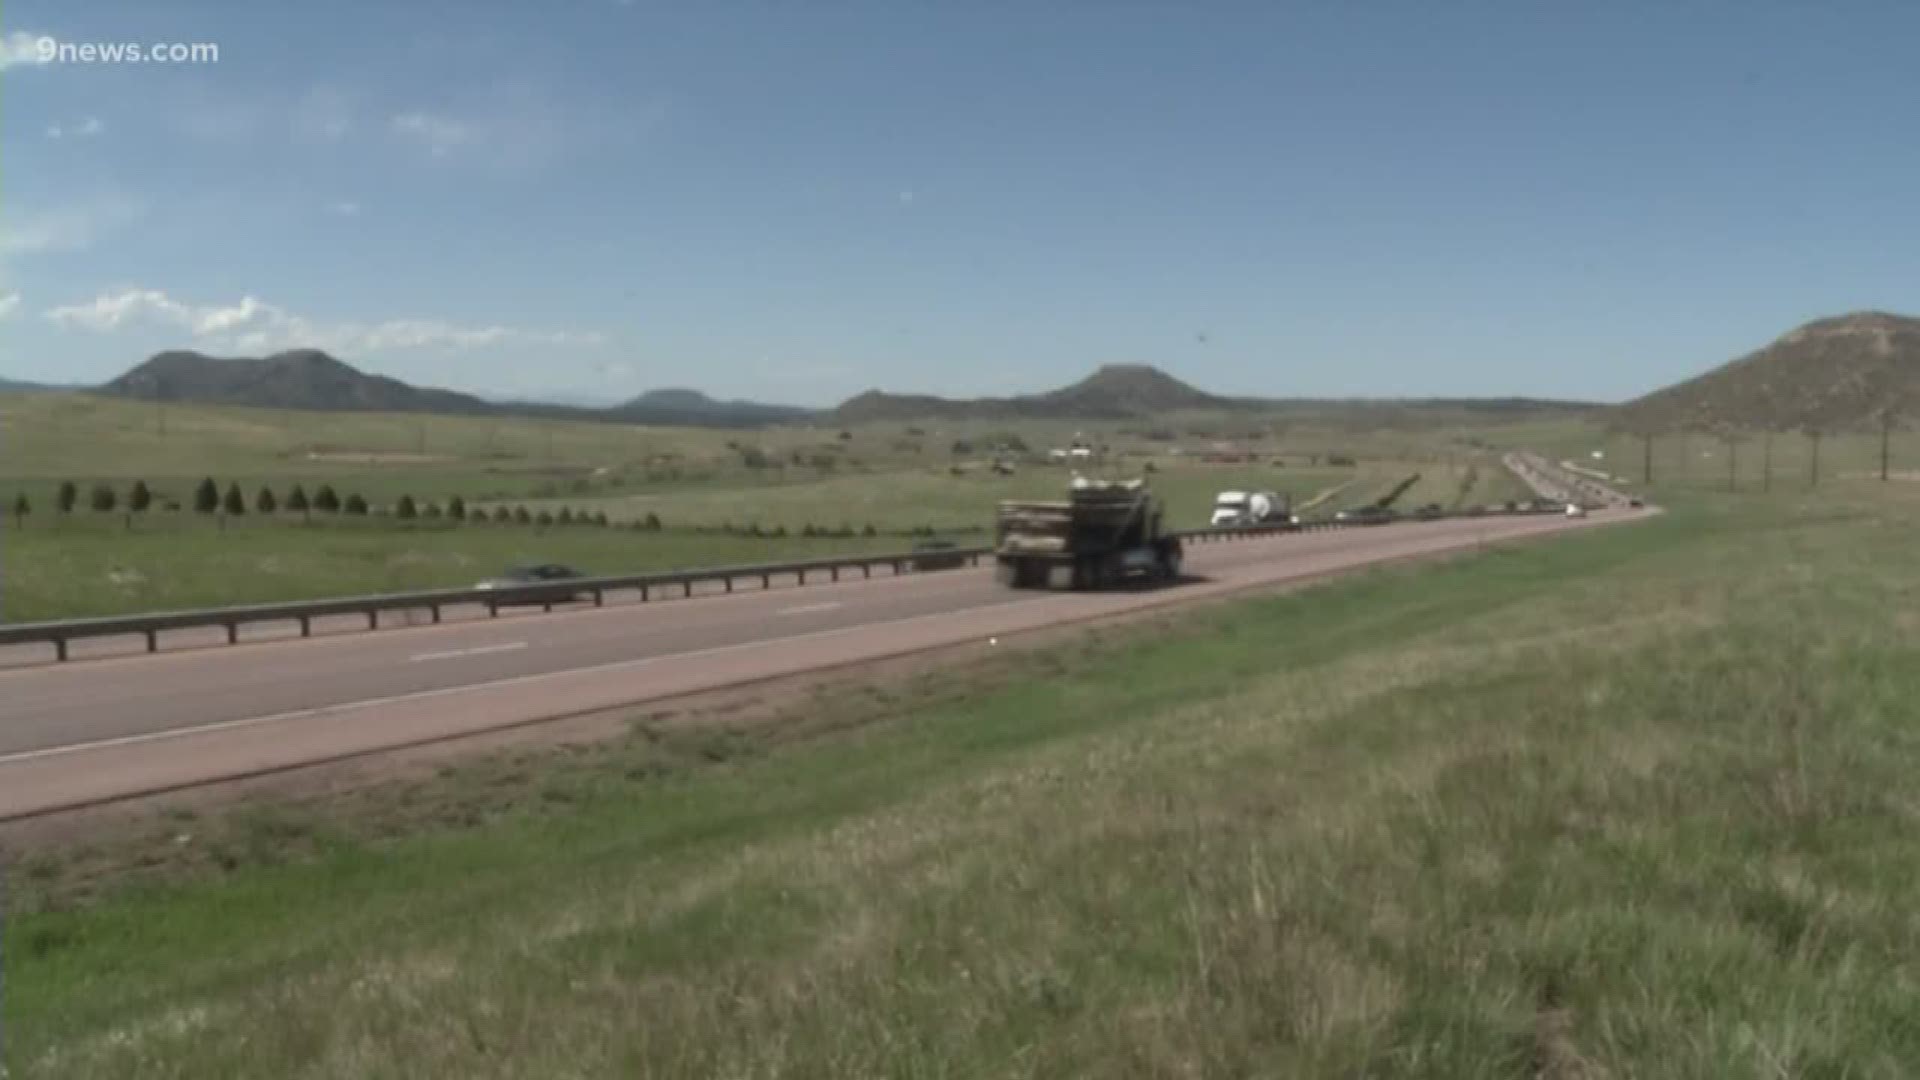 The deaths of Troopers Donahue and Jursevics are part of the reason CDOT is expanding I-25 from Monument to Castle Rock.